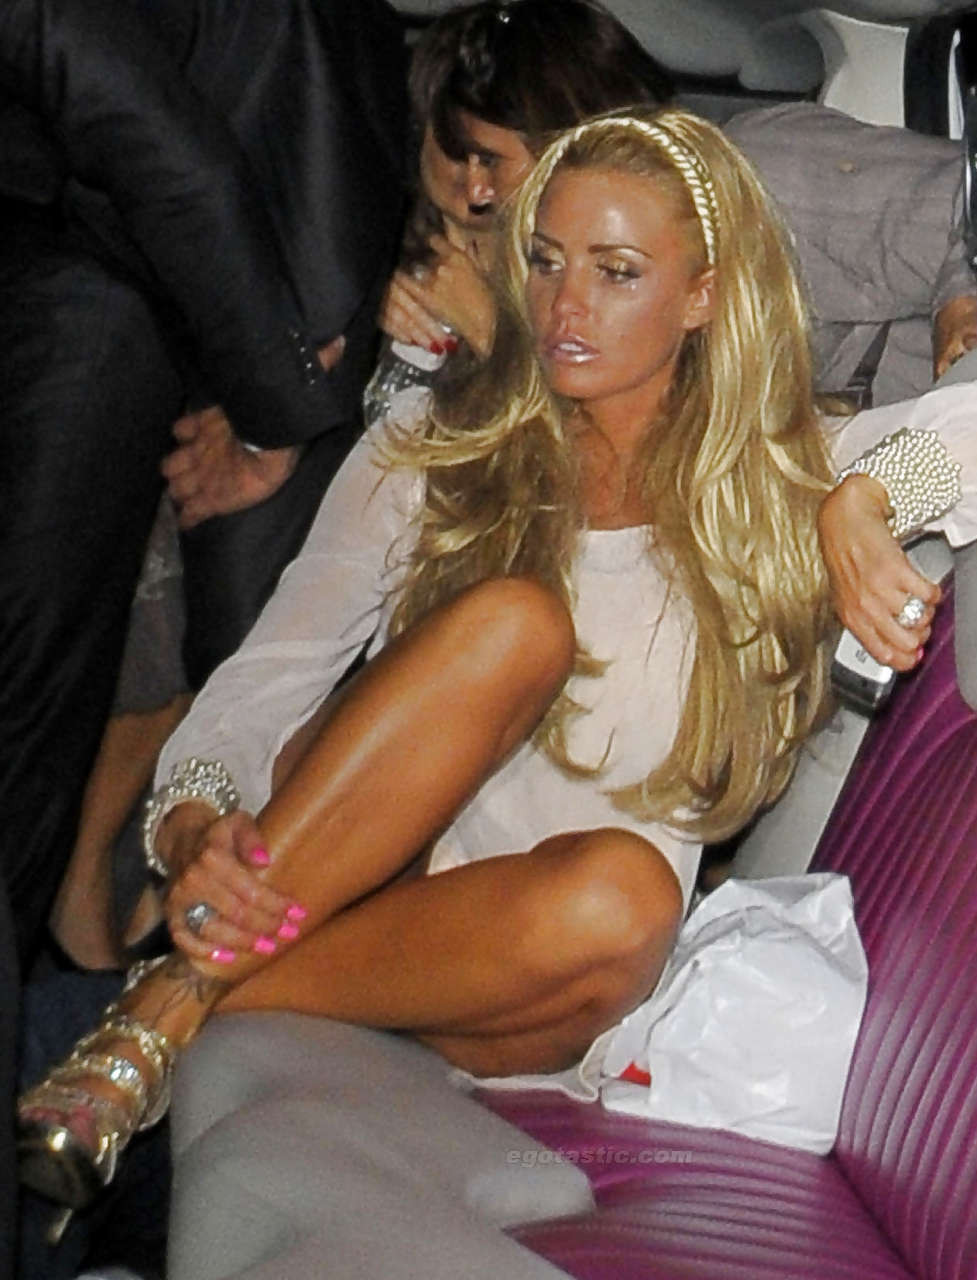 Katie Price Jordan give nice view on her panties to paparazzi and show huge clea #75289023